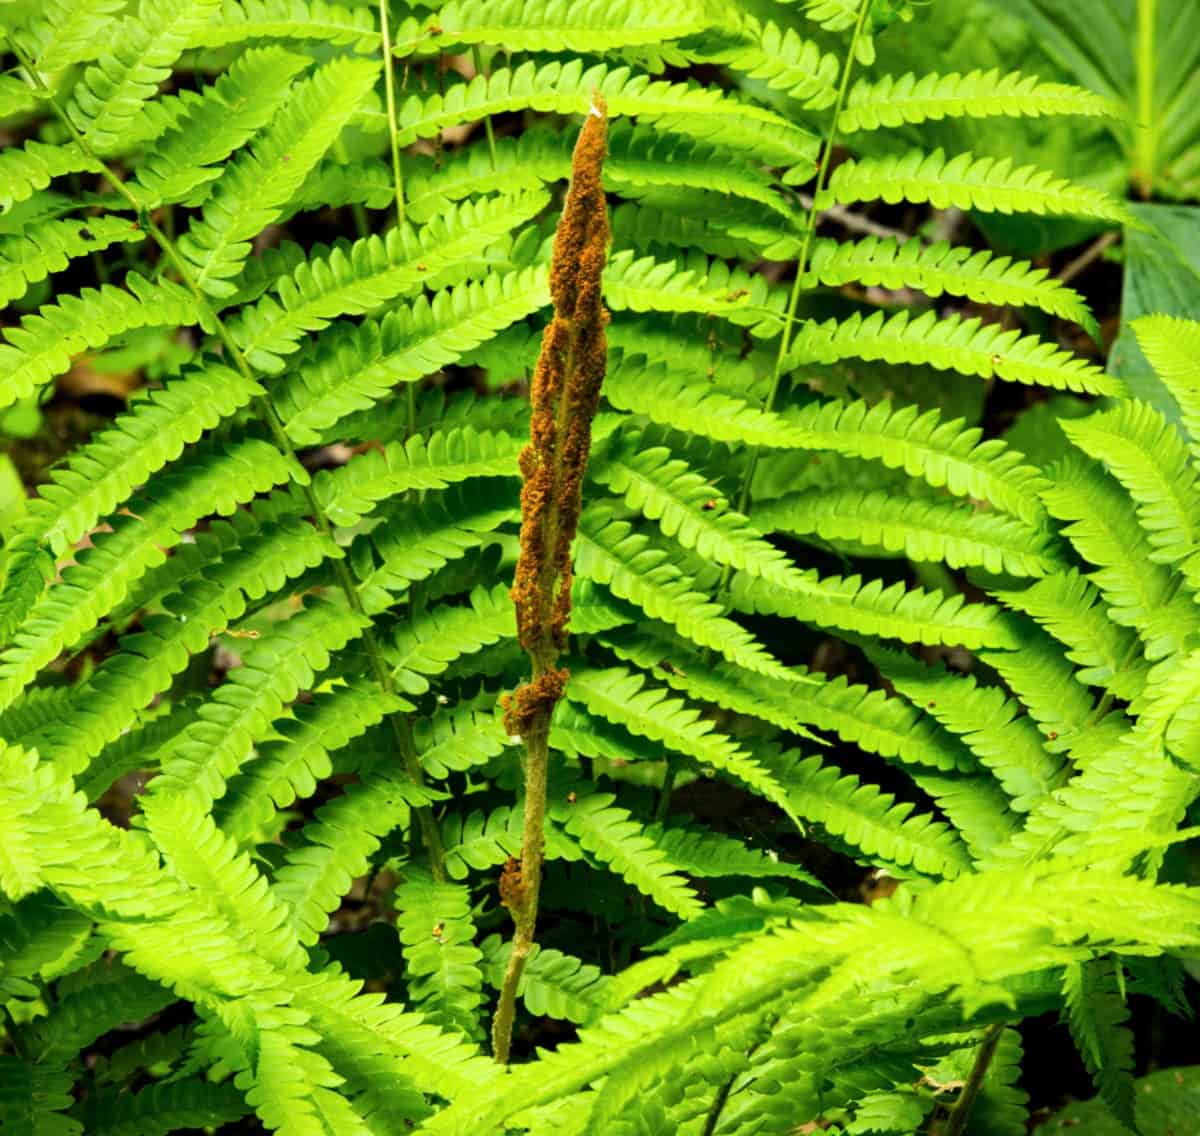 Some of the fronds of the cinnamon fern are colored brown and others are green.